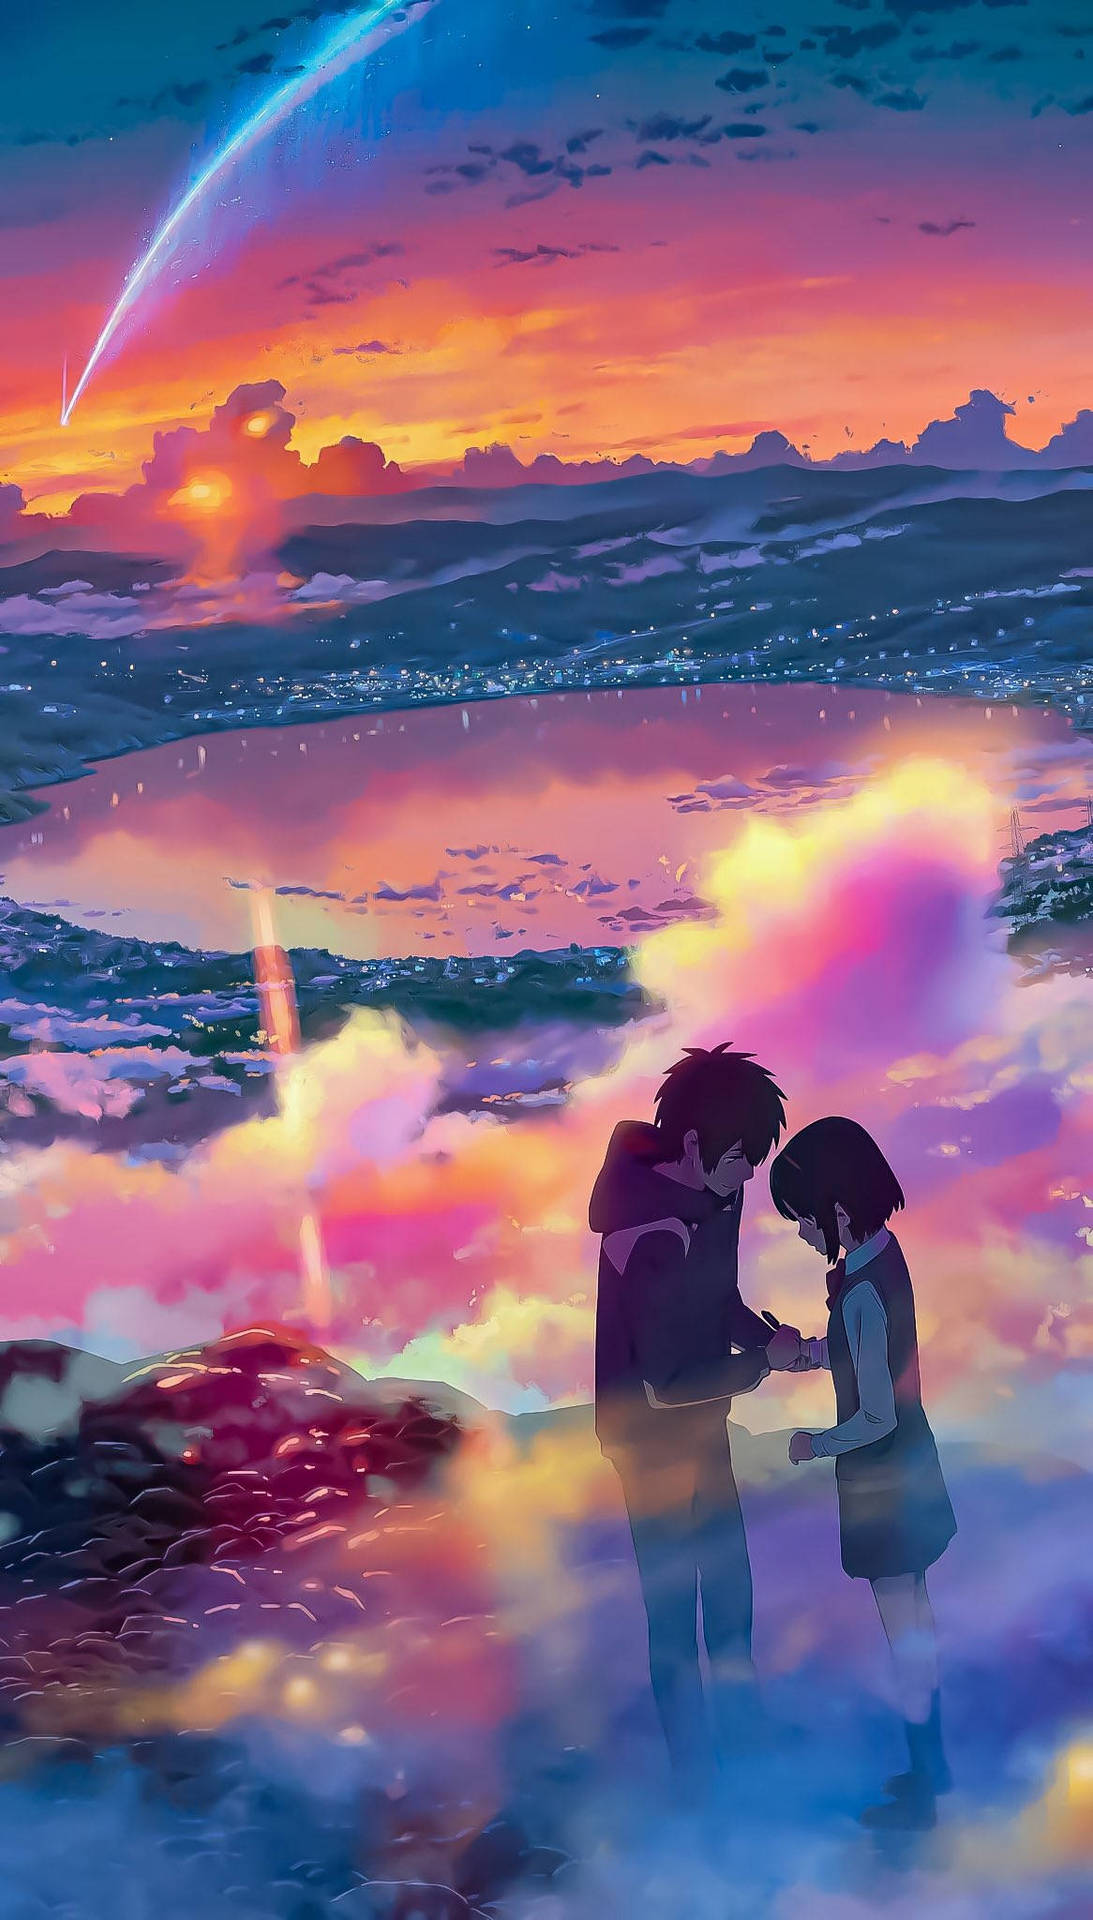 Download Your Name Anime Aesthetic Sunset Wallpaper 